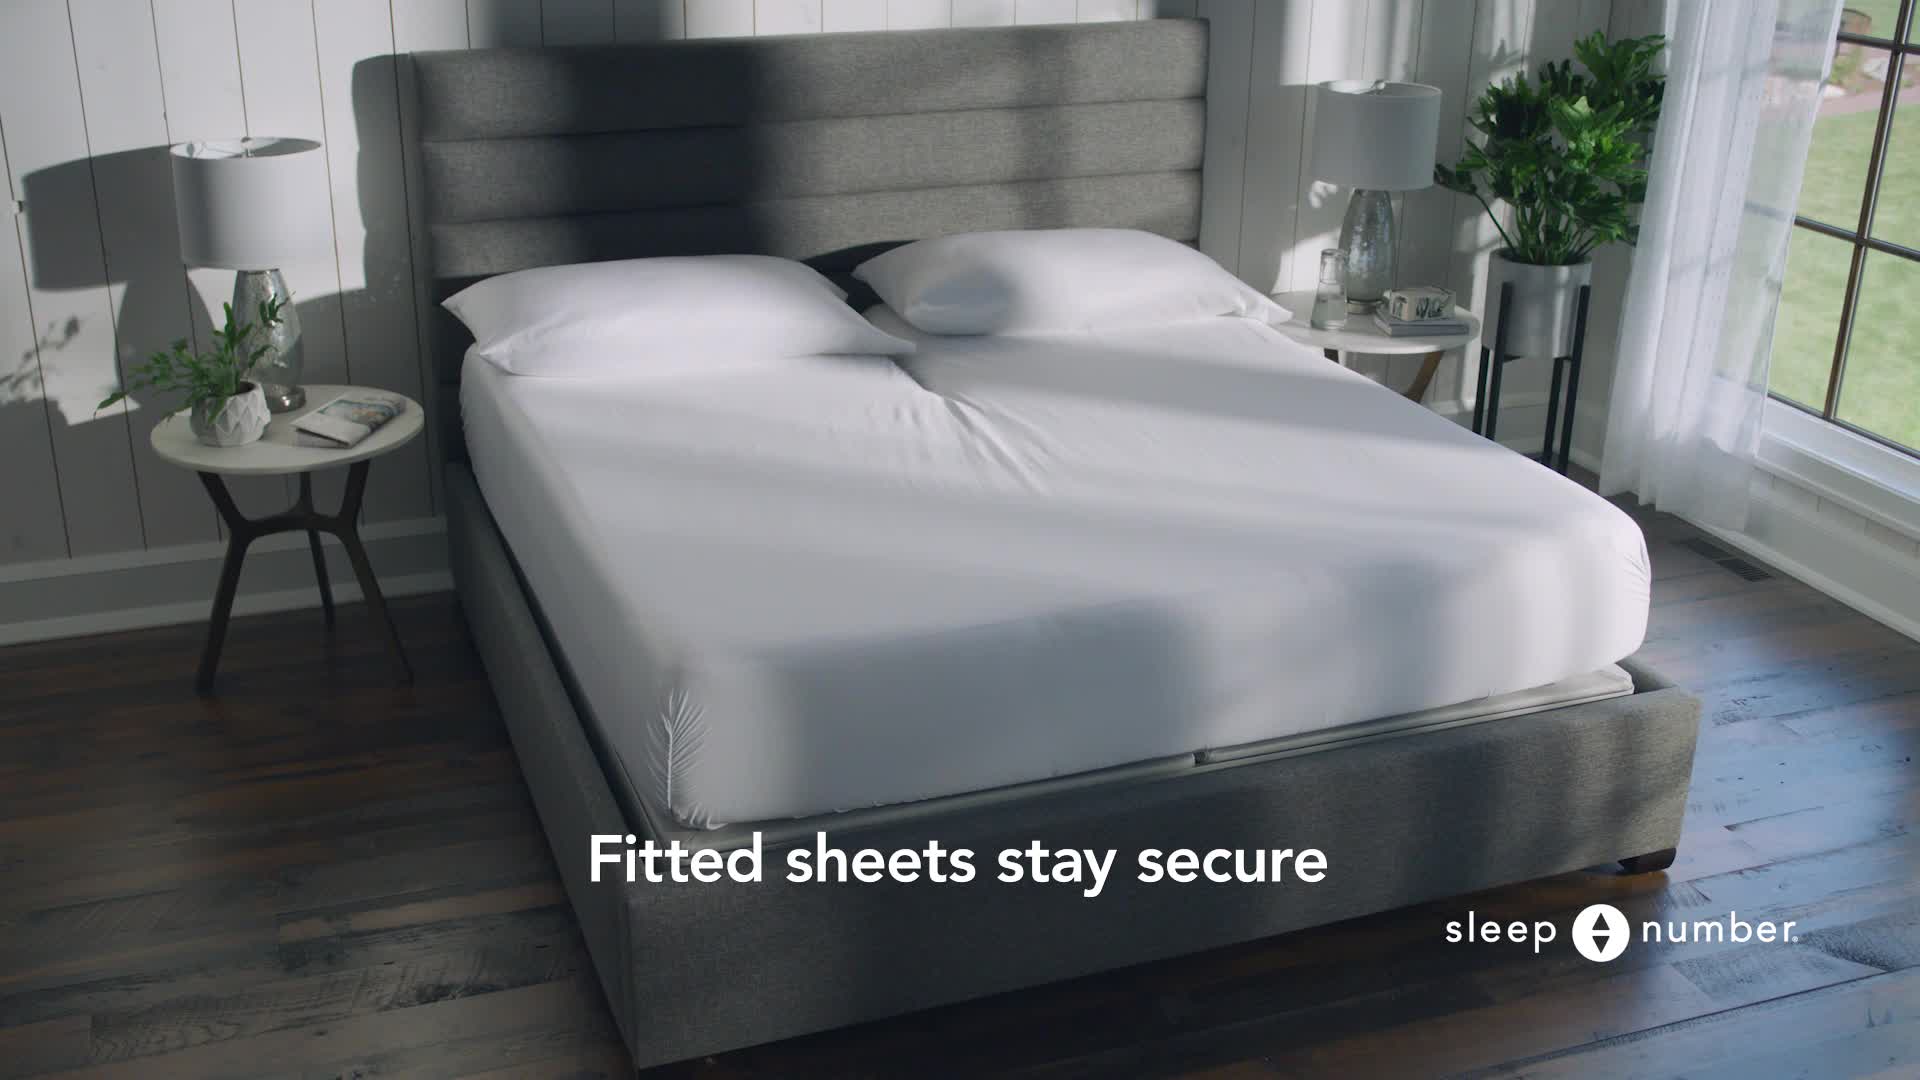 Sleep Number Mattress Cover Washing Instructions